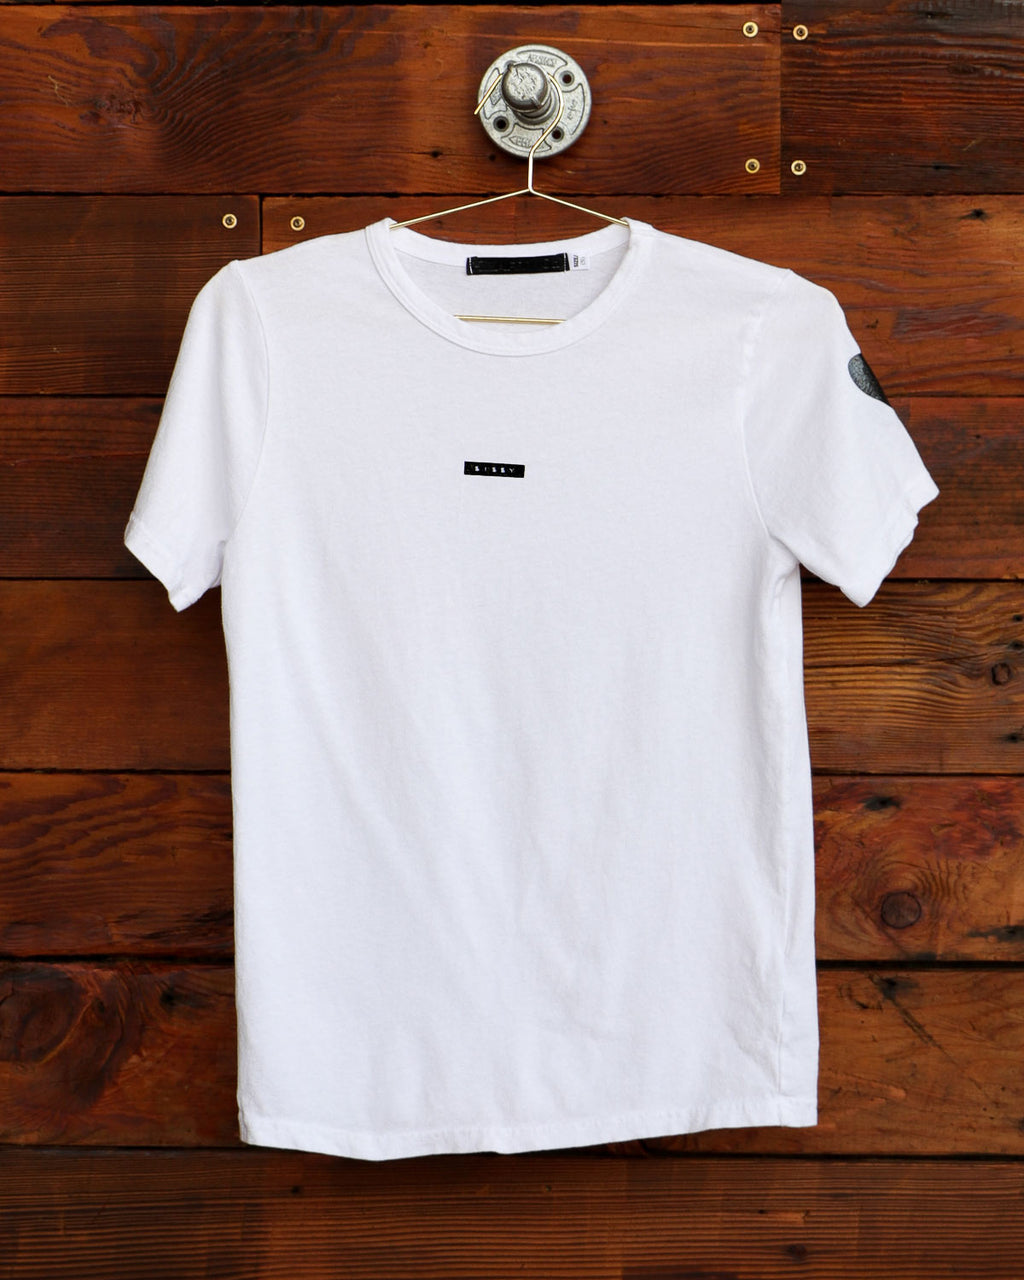 White Sissy label t-shirt hanging on weathered wood wall